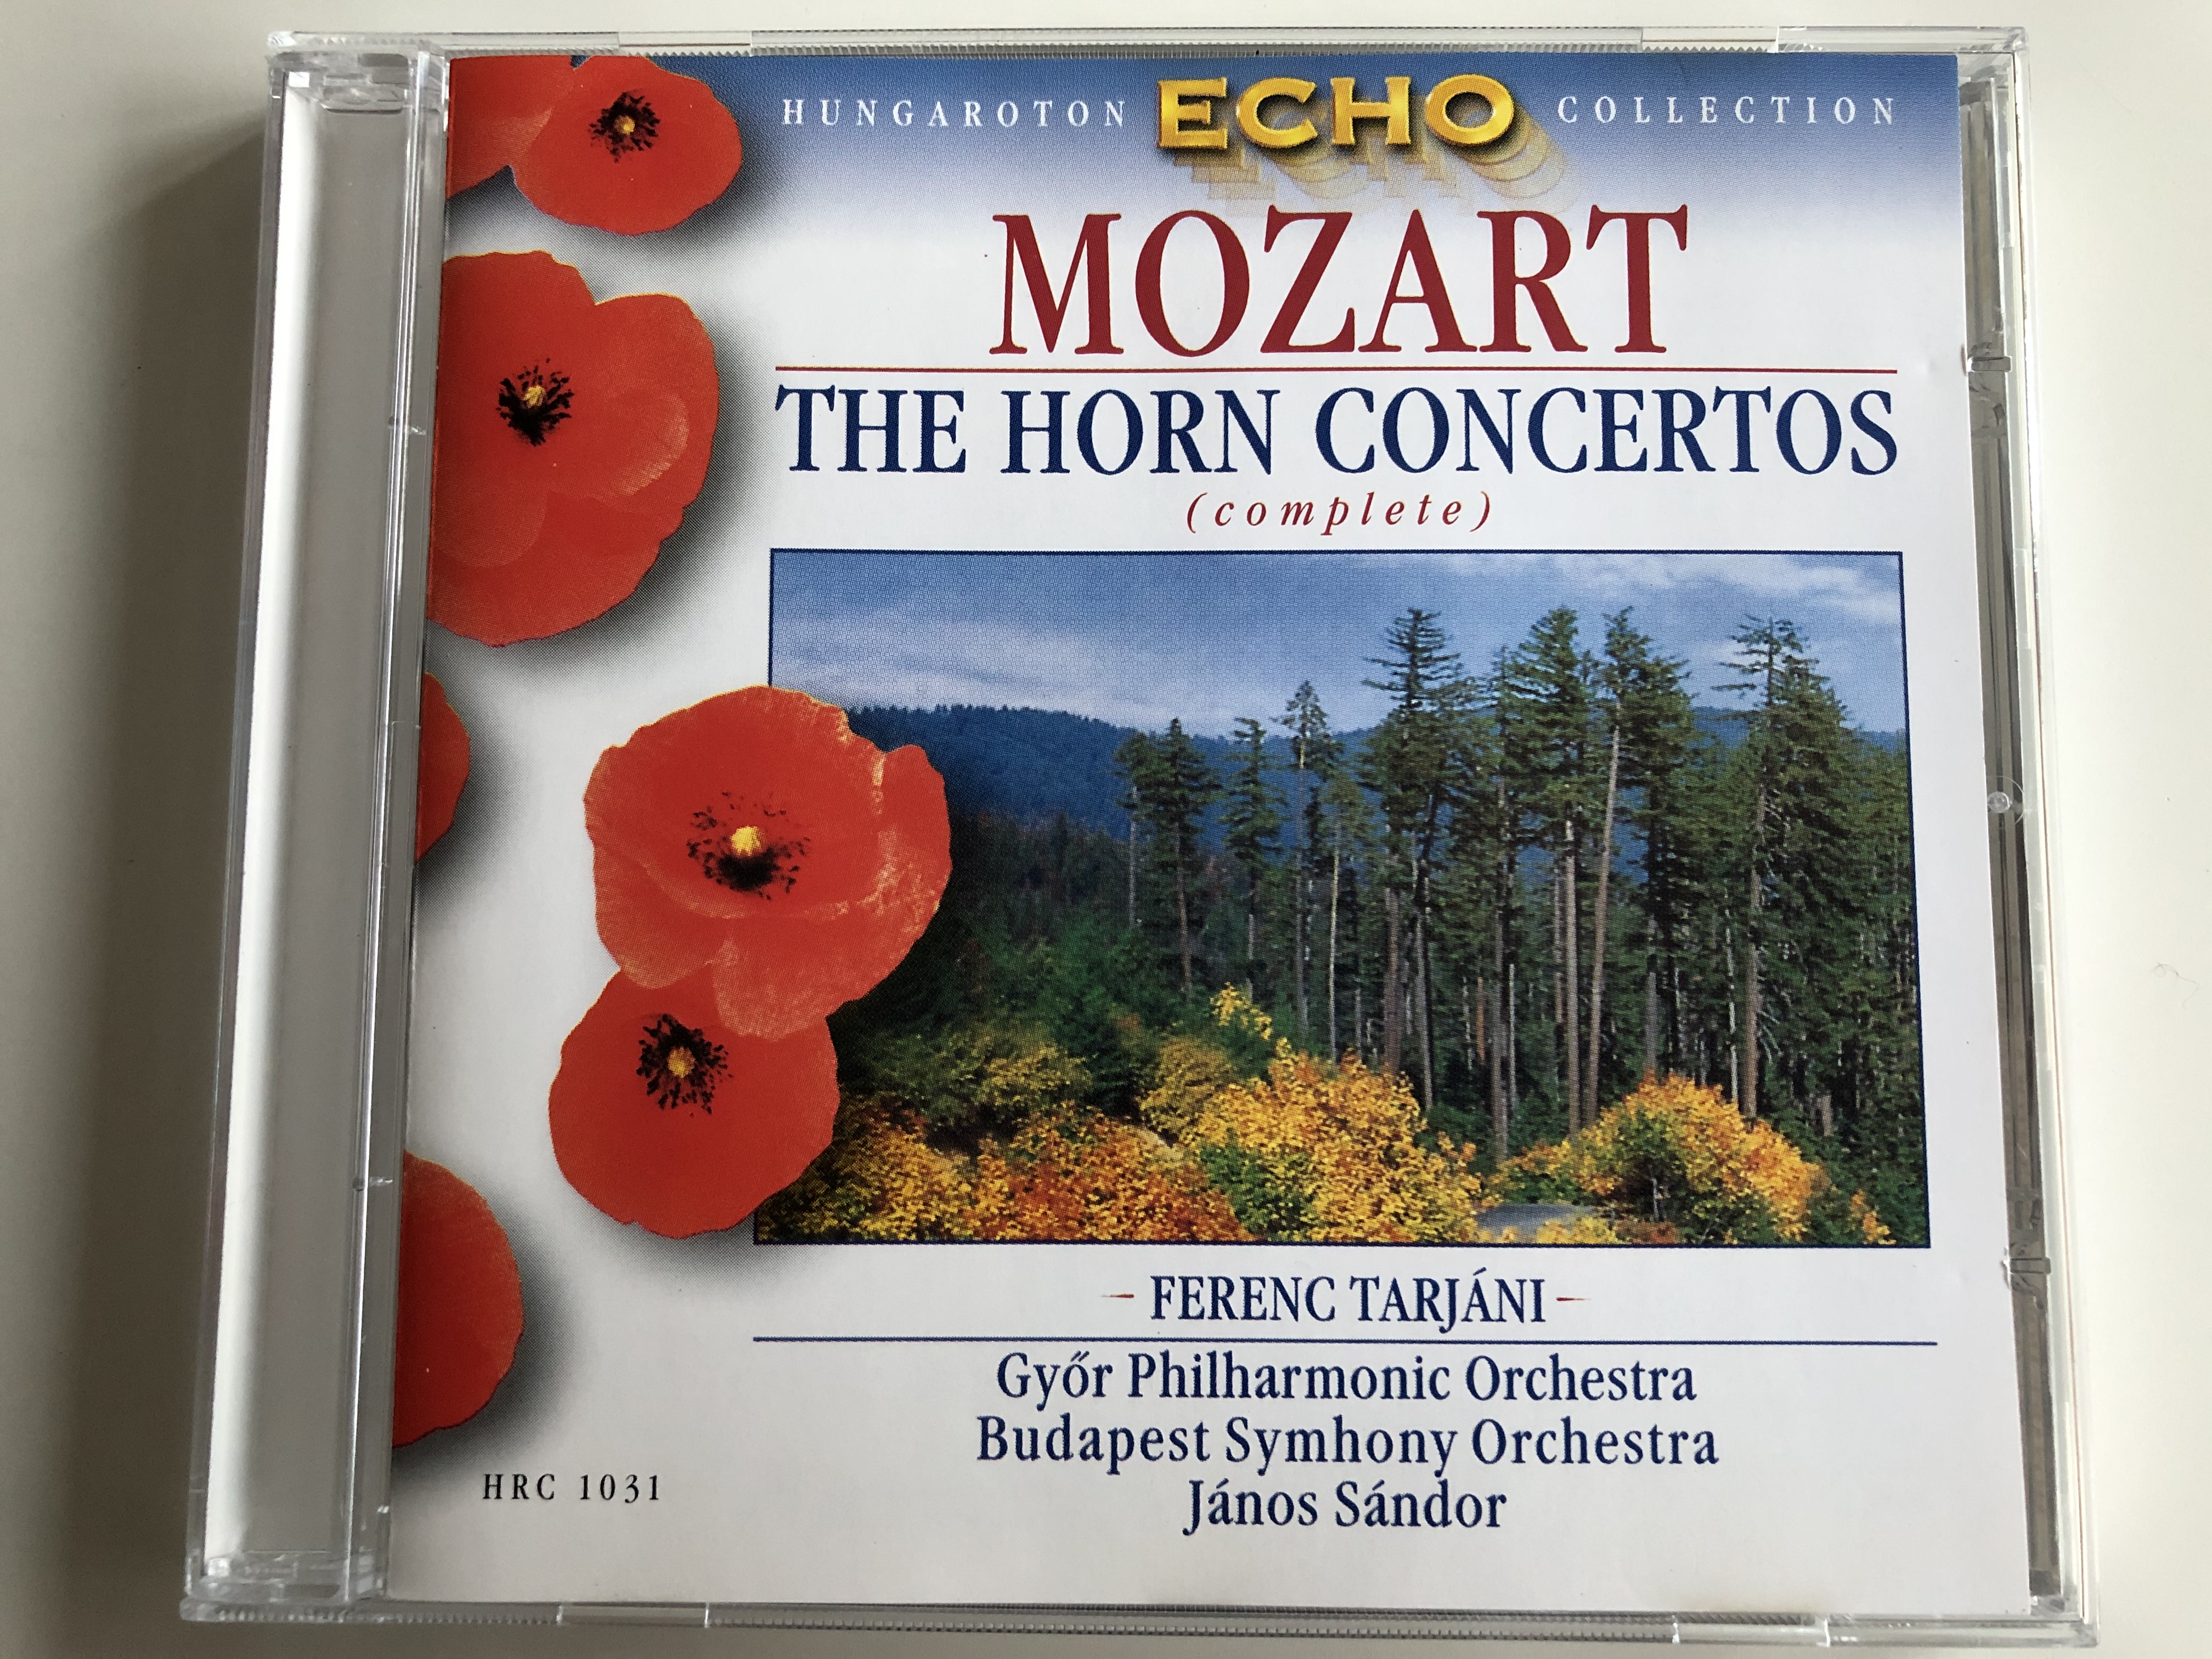 mozart-the-horn-concertos-complete-ferenc-tarj-ni-gy-r-philharmonic-orchestra-budapest-symphony-orchestra-janos-sandor-hungaroton-classic-audio-cd-1999-stereo-hrc-1031-1-.jpg